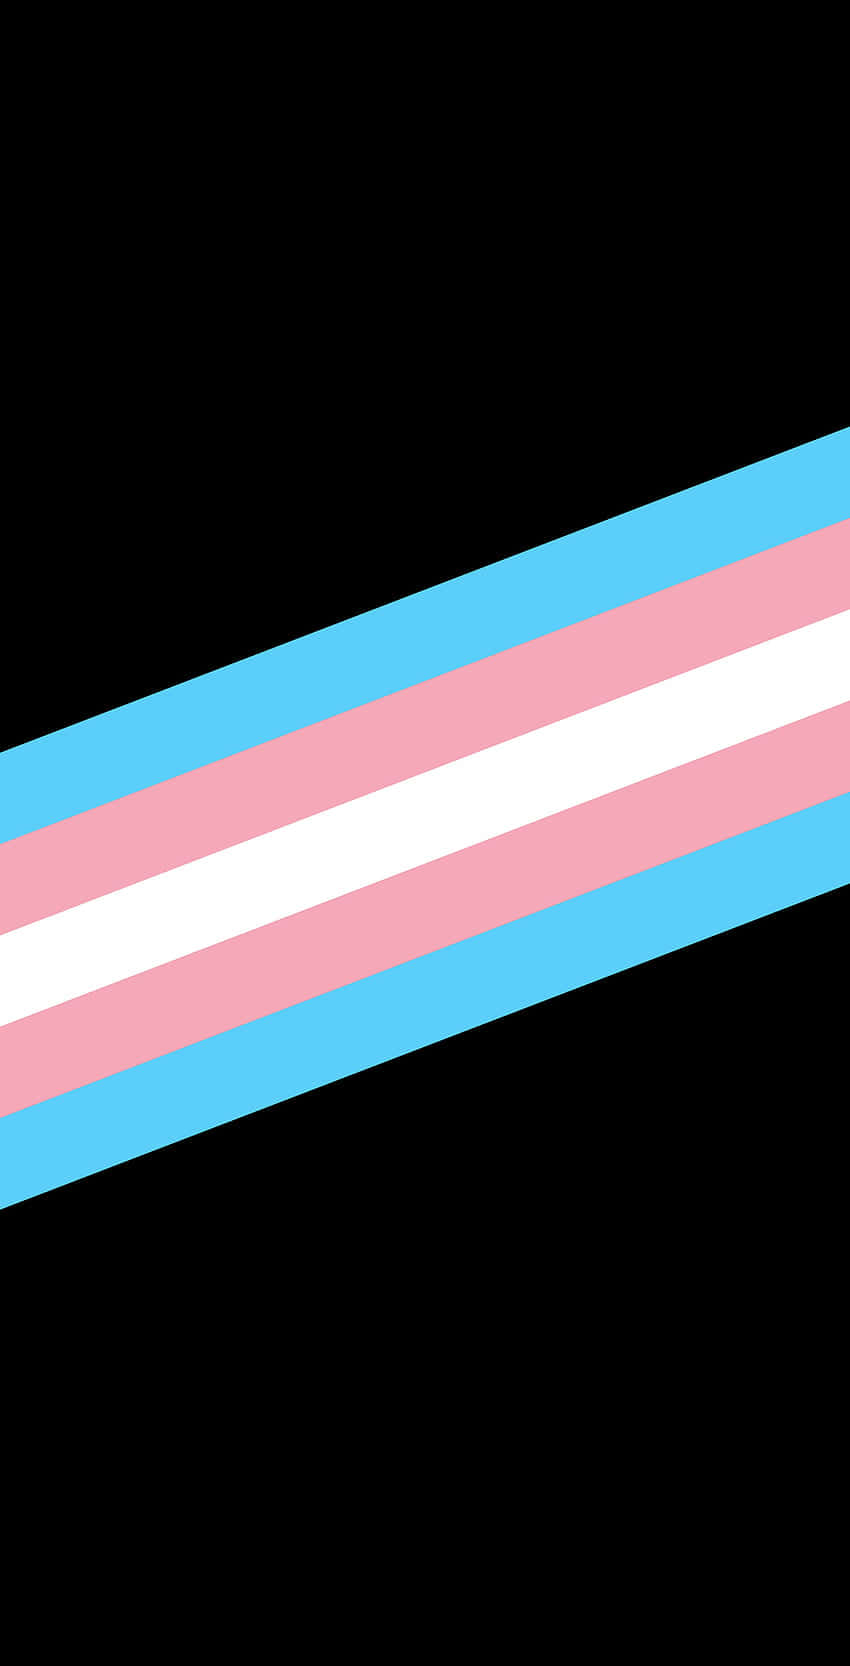 OREO Cookie on X: The Transgender pride flag consists of five